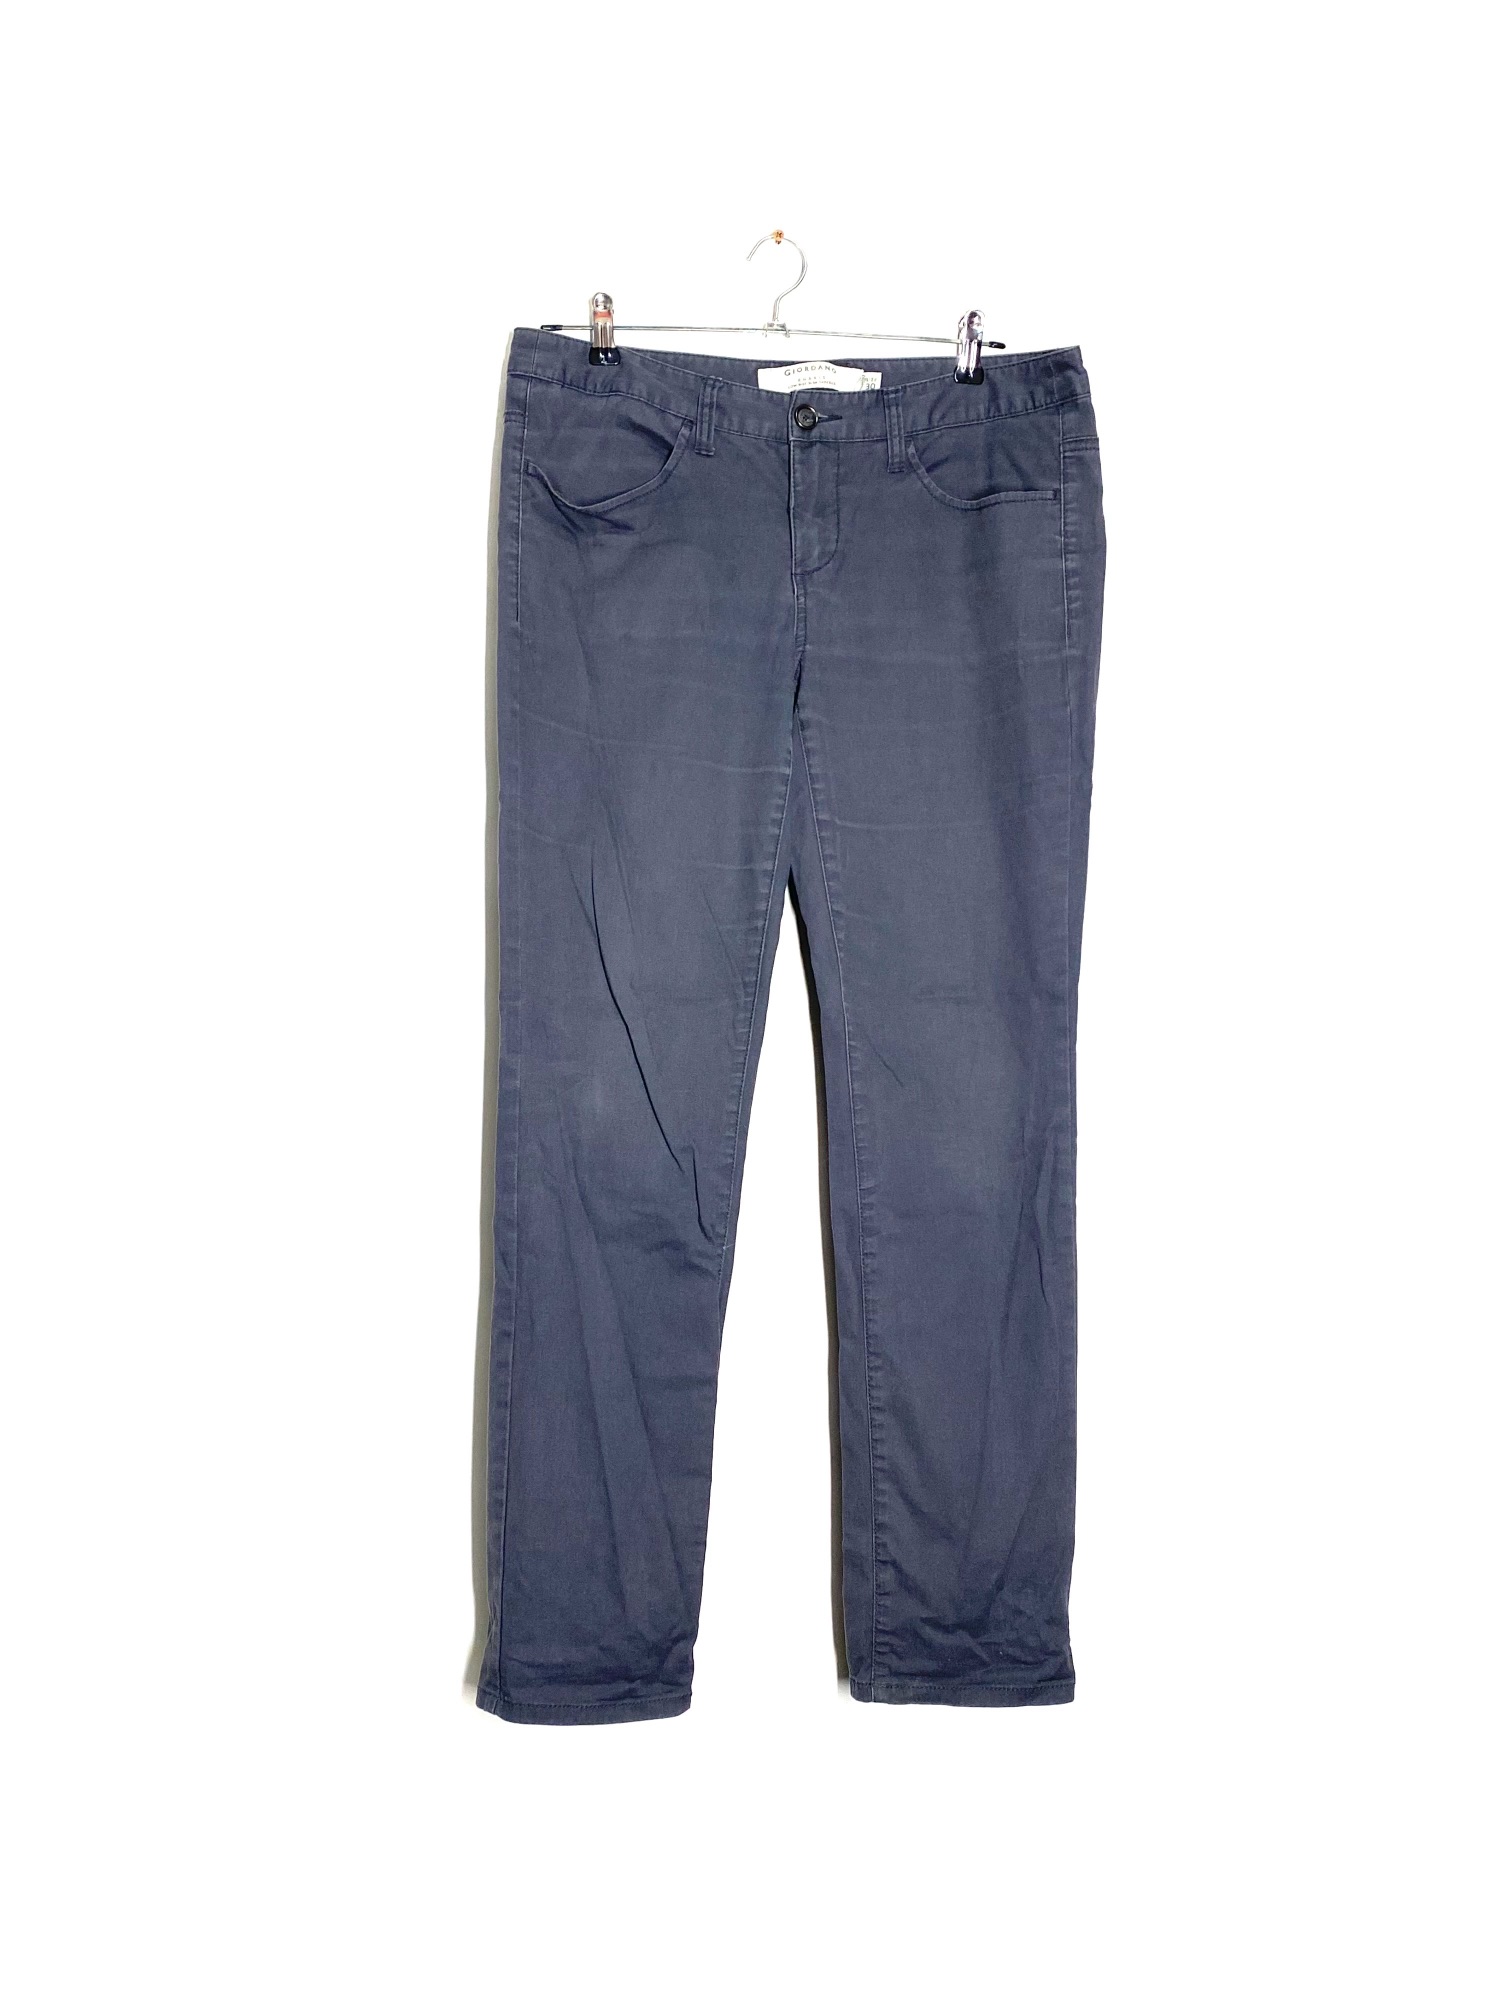 Giordano Blue Low Rise Chinos - Size 12 - The Re: Club